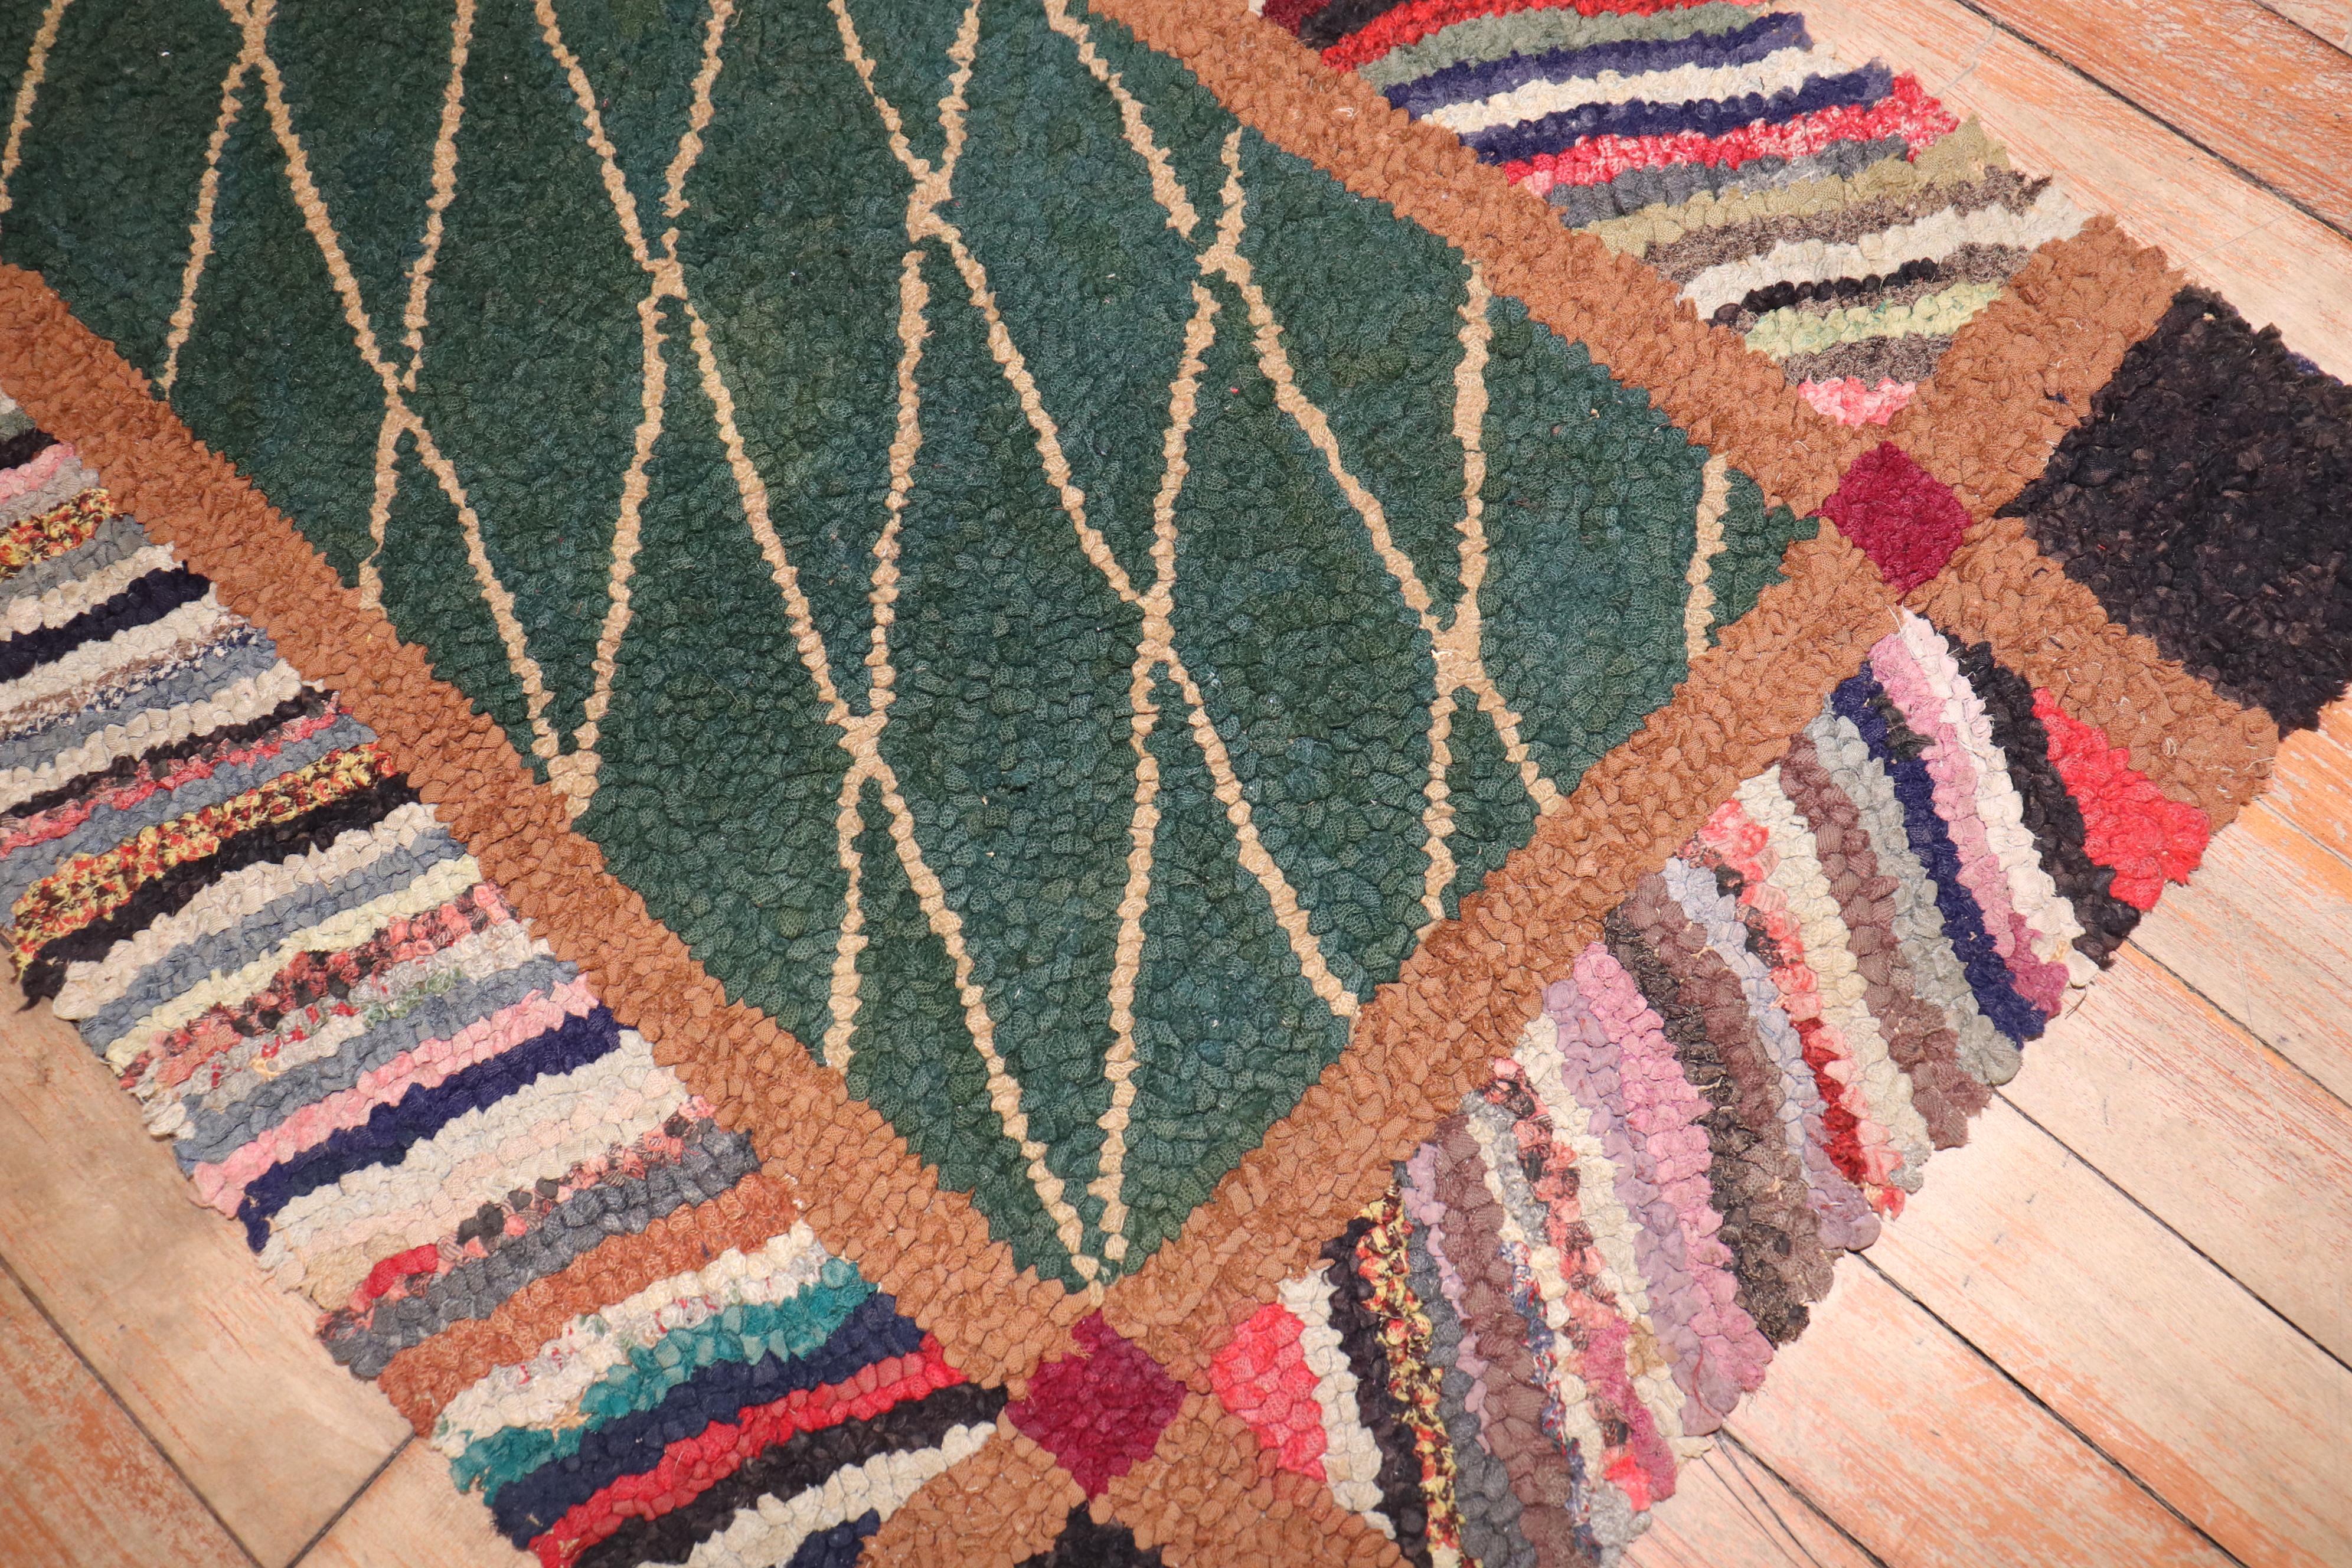 
An American hooked mini size rug from the 2nd quarter of the 20th century

rug no.	j3877
size	2' x 3' 2